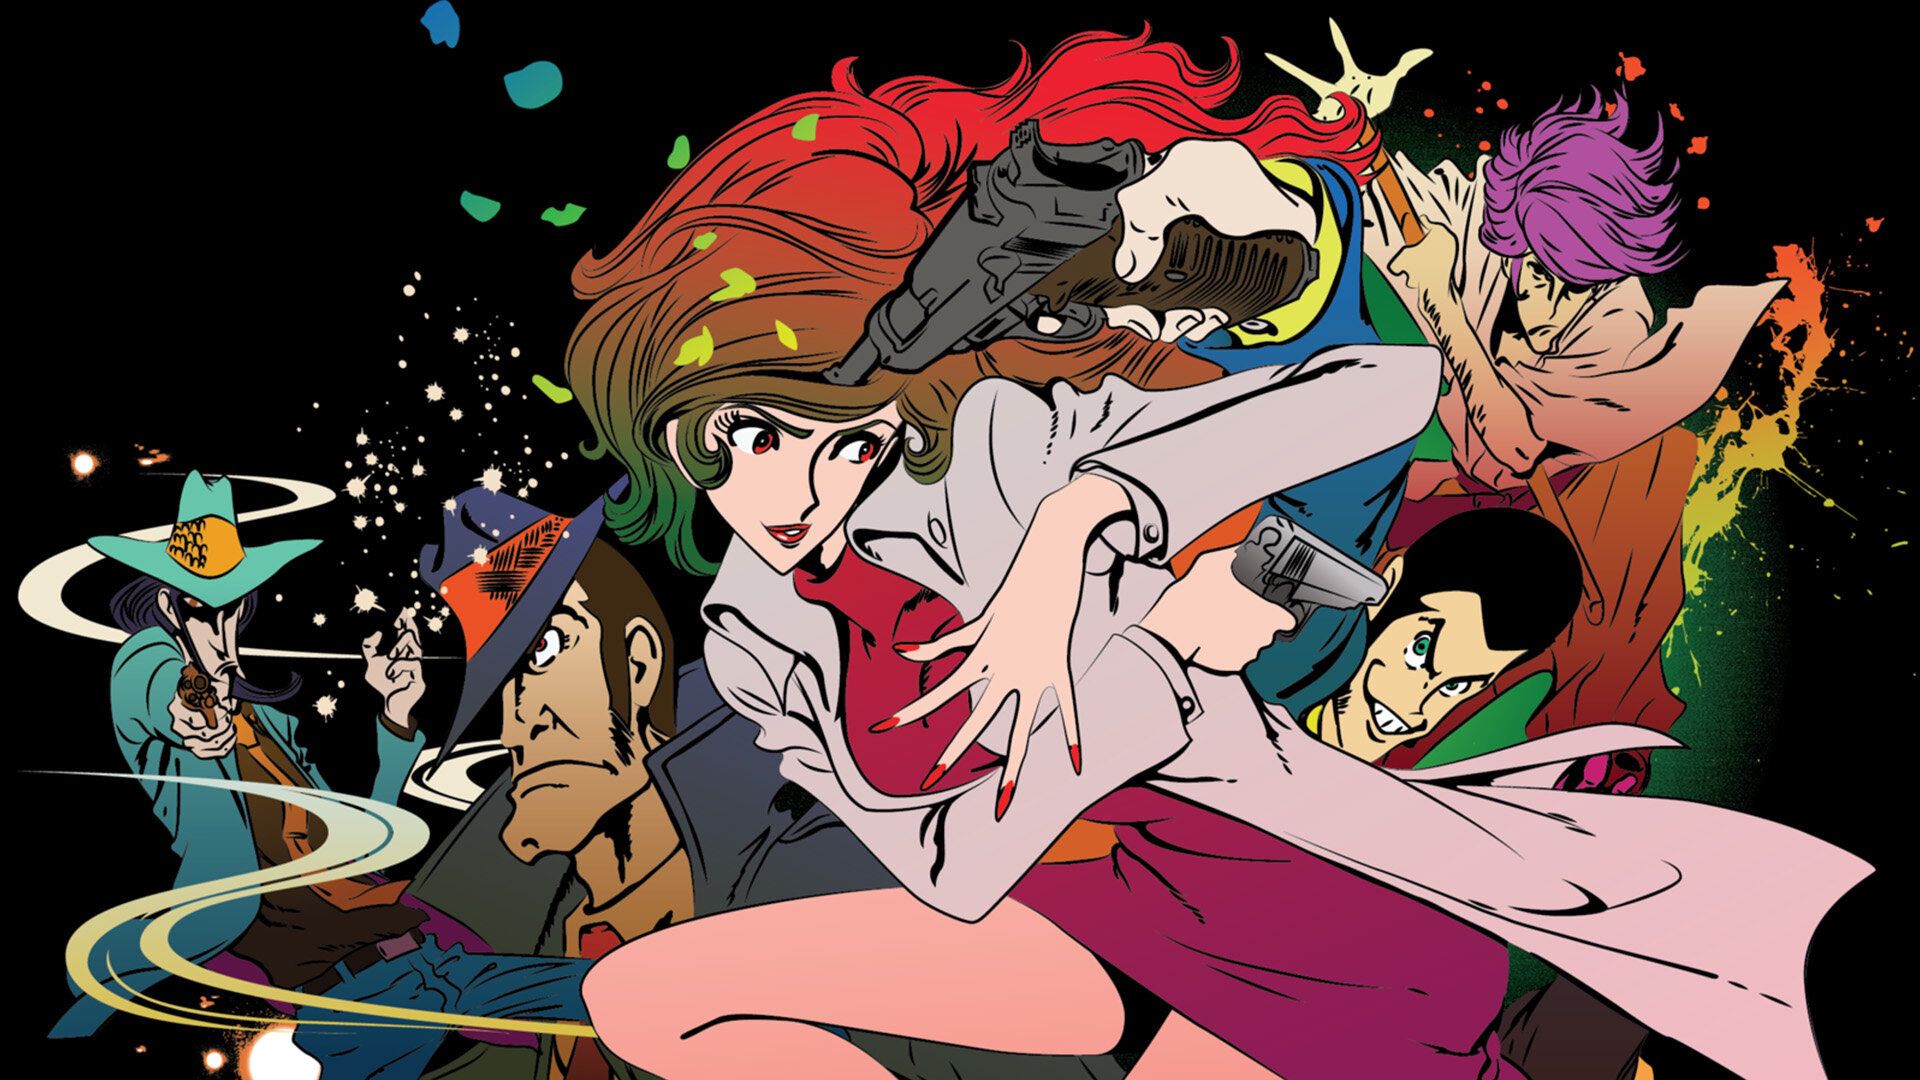 Lupin the Third: The Woman Called Fujiko Mine background